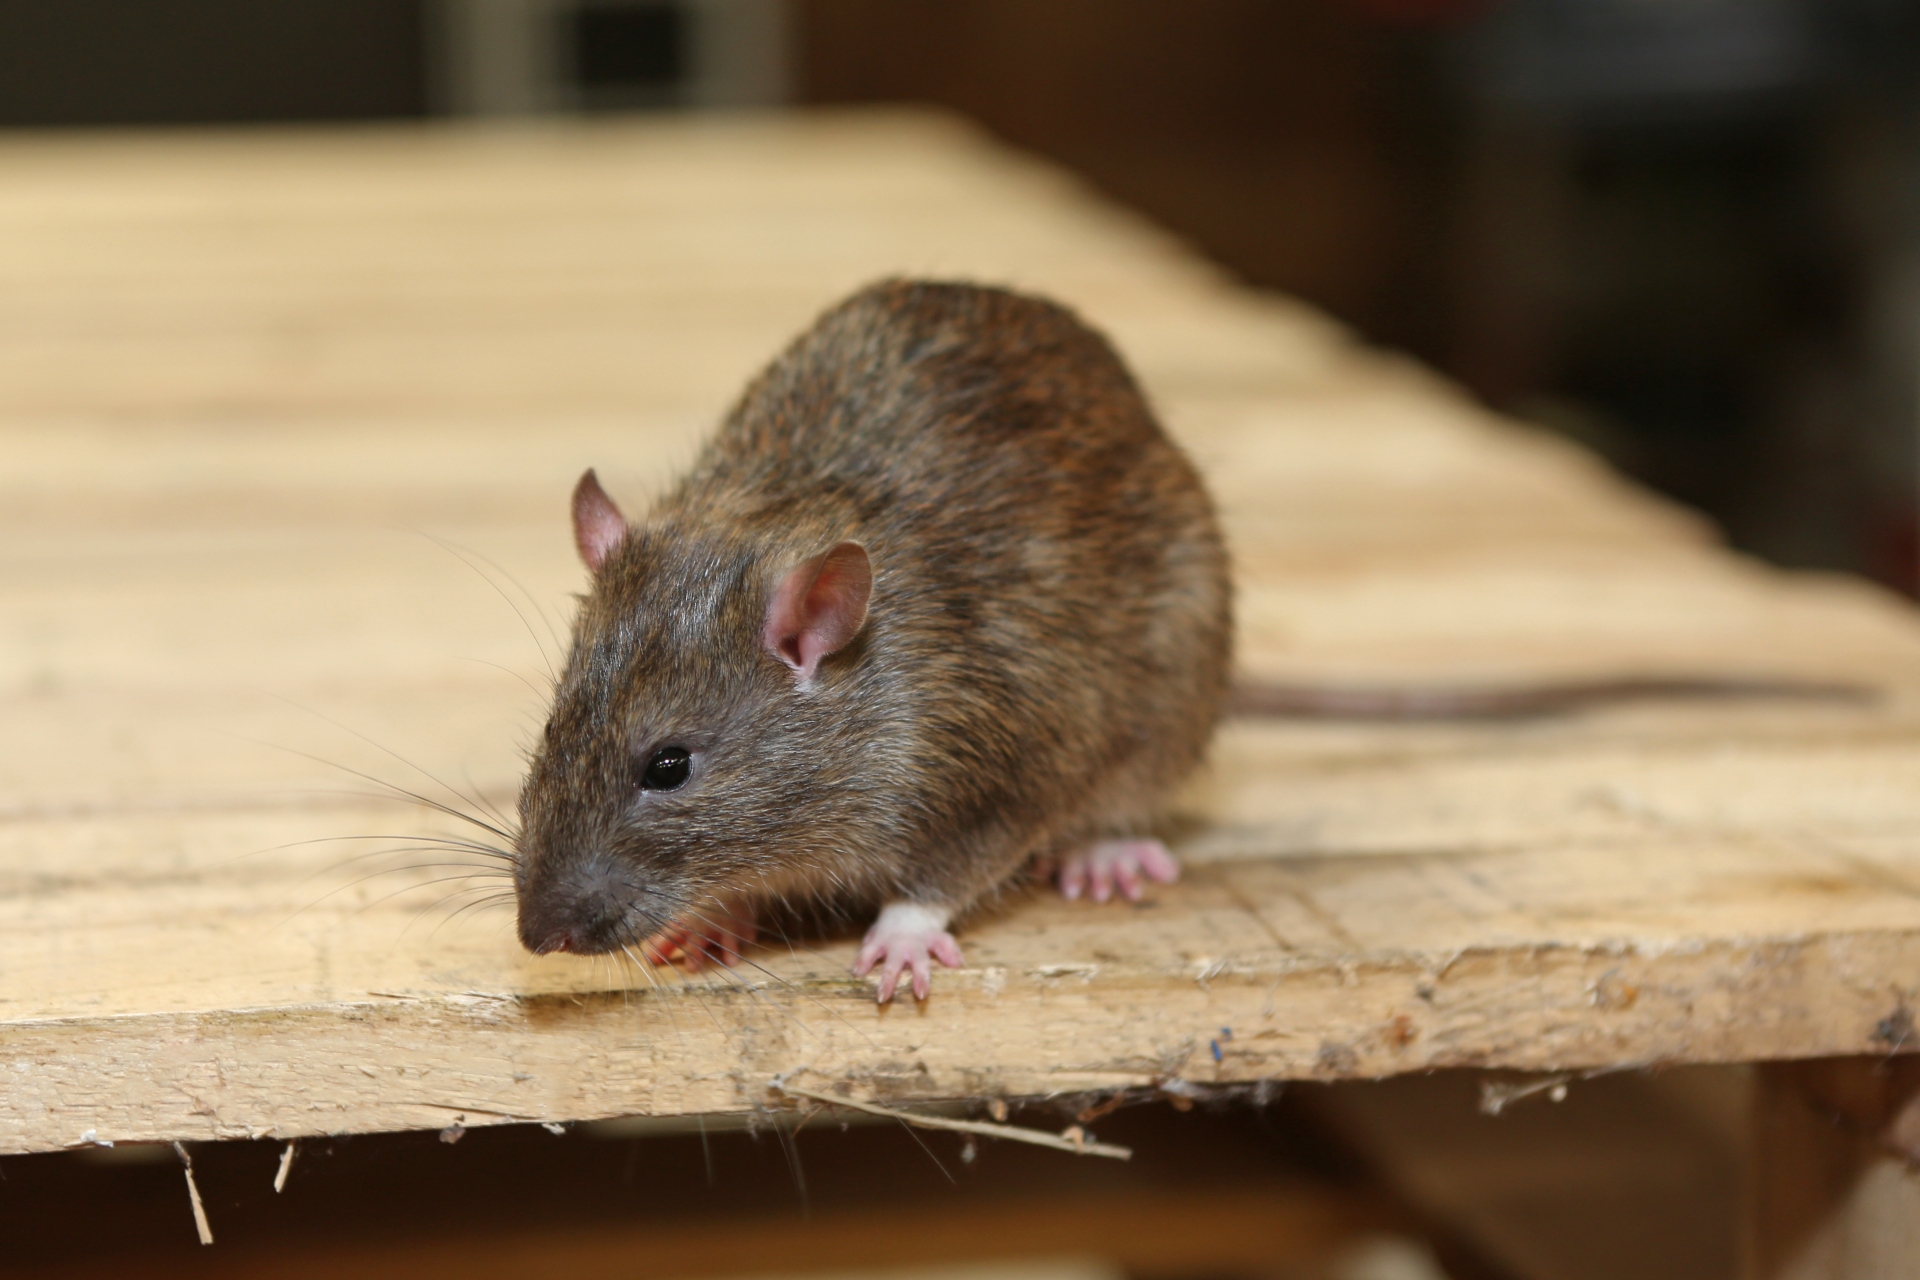 Rat Infestation, Pest Control in Rickmansworth, Chorleywood, Croxley Green, WD3. Call Now 020 8166 9746